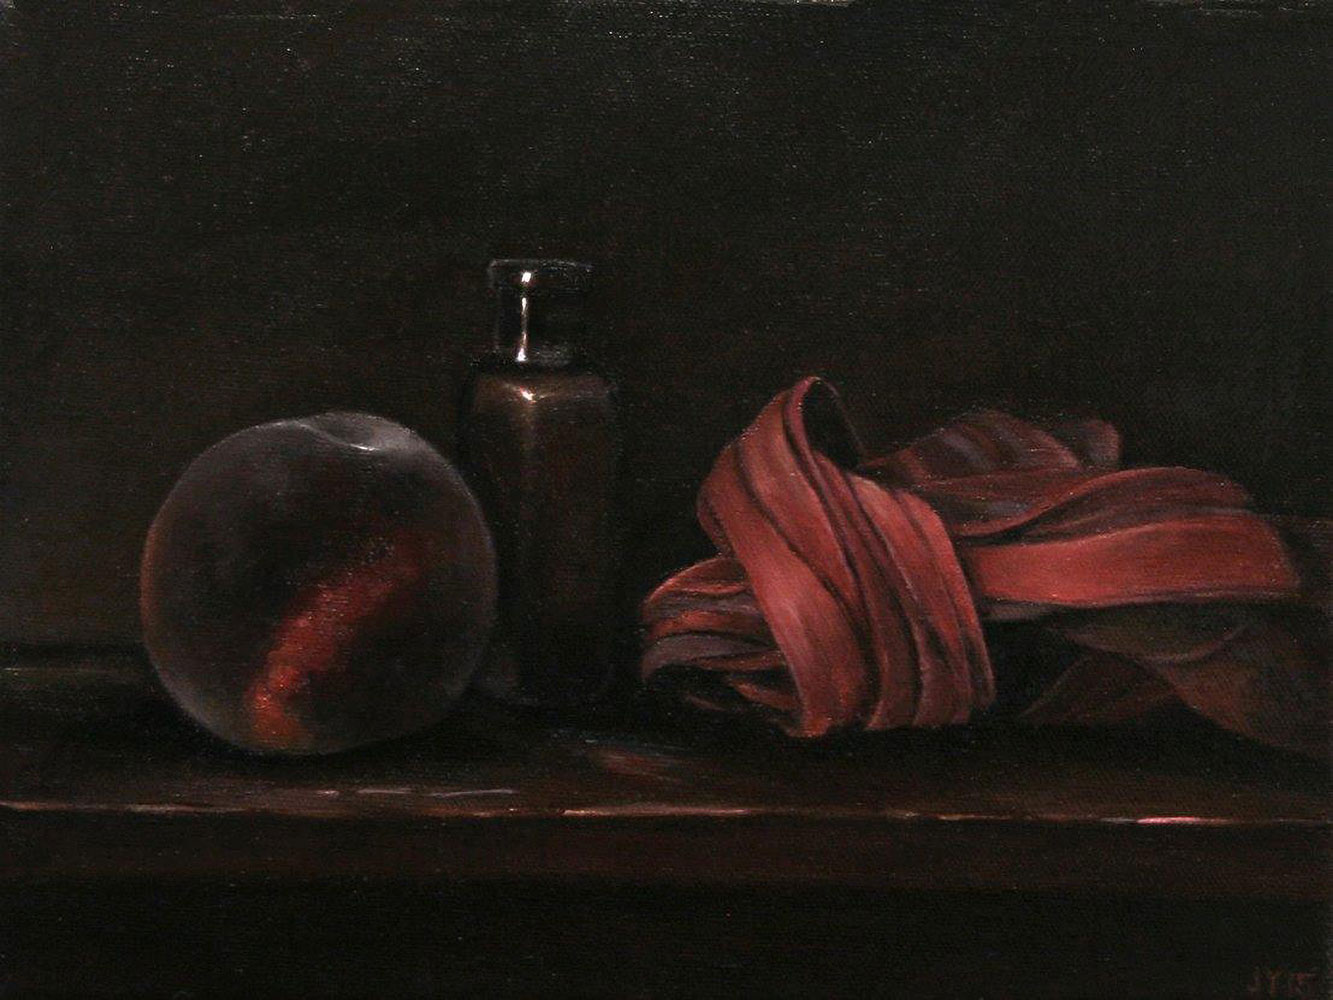 Twisted-silk-with-peach-and-bottle-Oil-on-Linen-23cm-x30cm